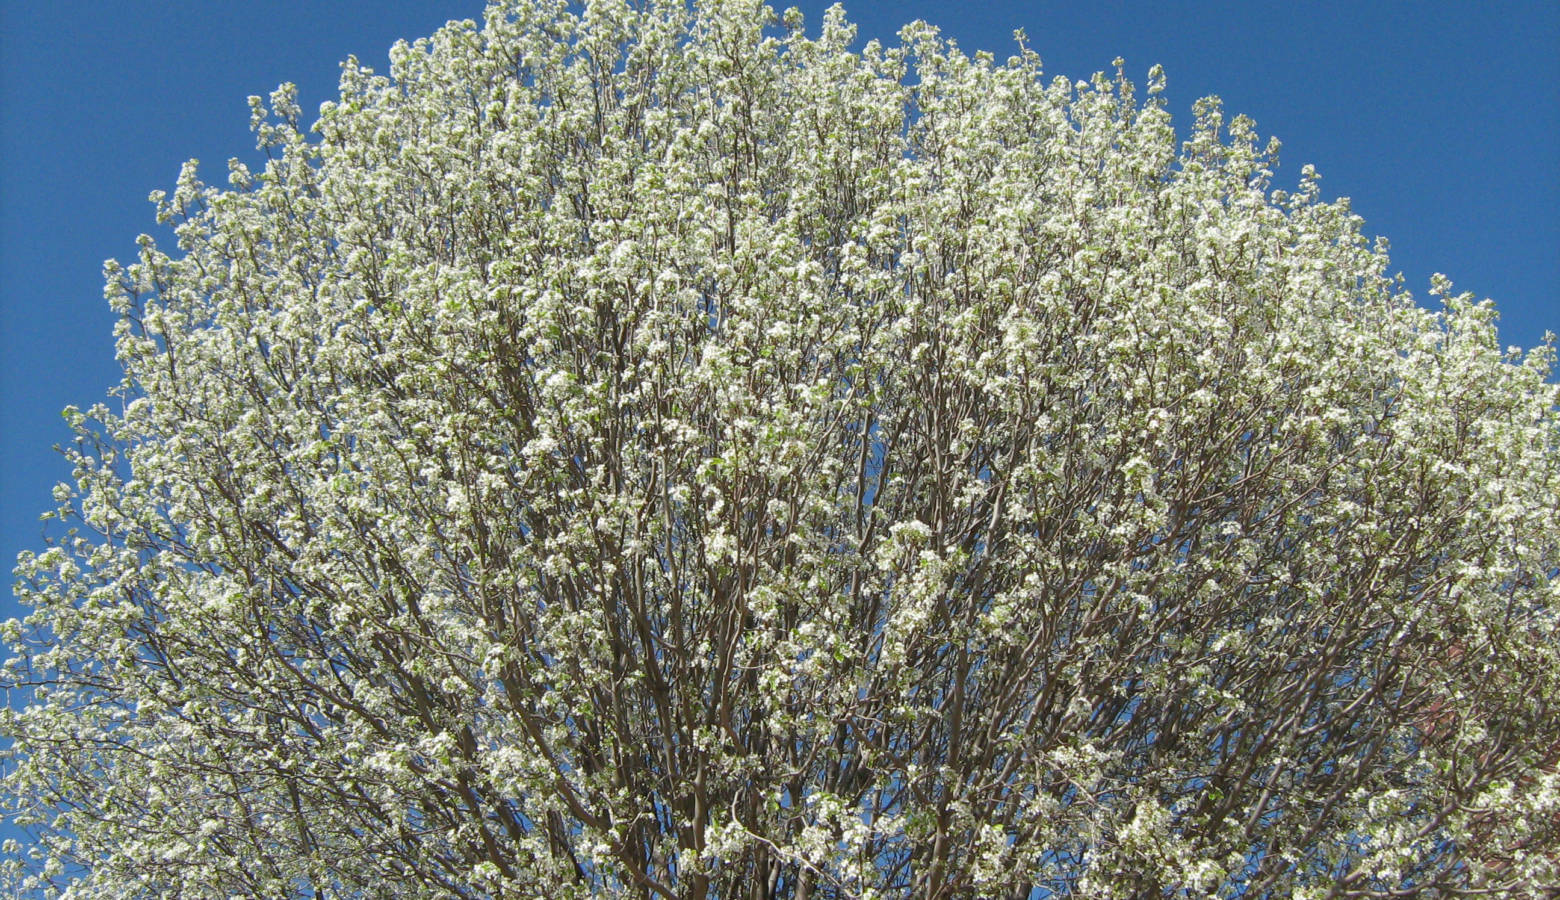 Callery pears, like the Bradford pear pictured, are often used as urban trees, but have a tendency to get brittle and break as they age. (oddharmic/Flickr)